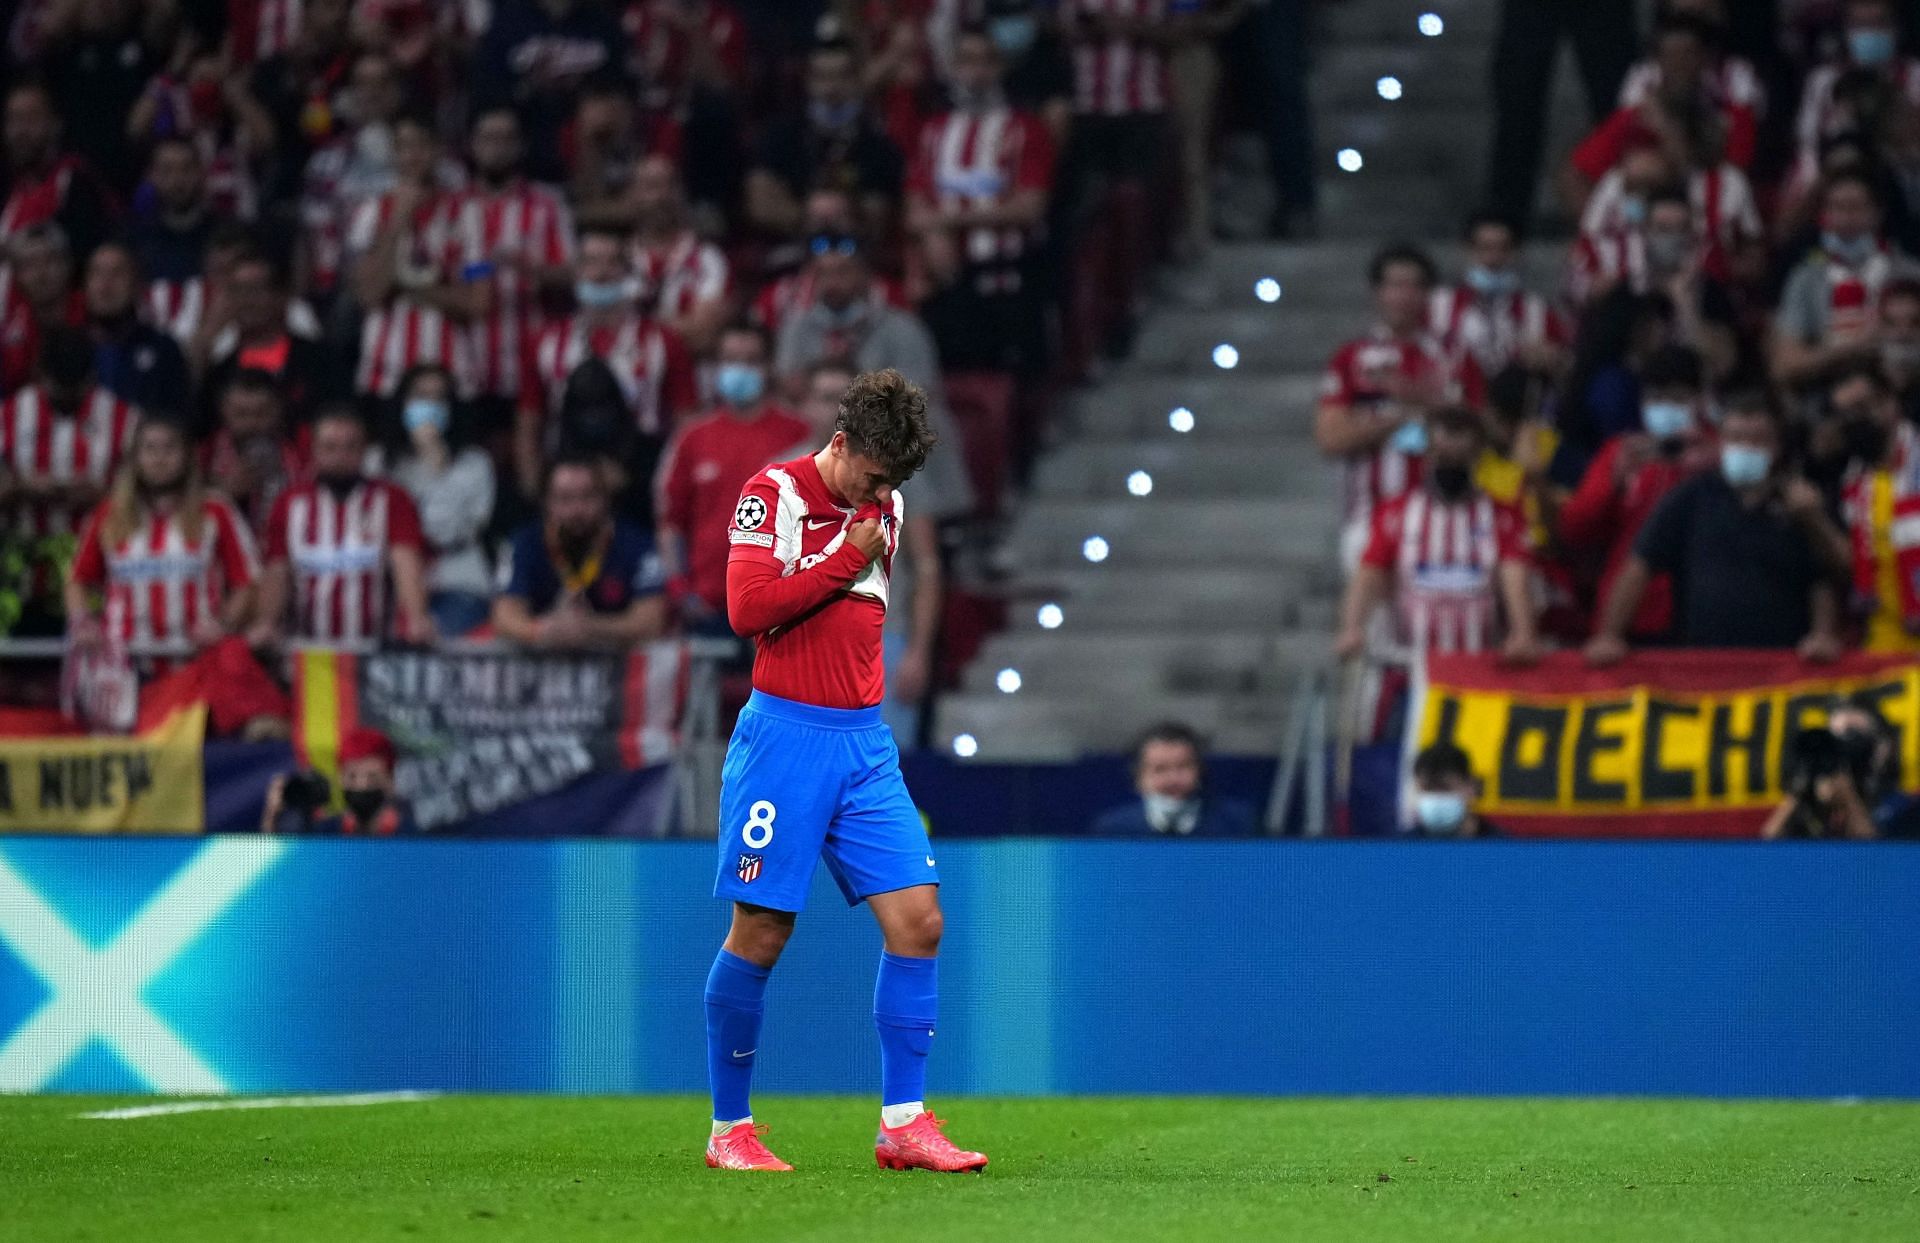 Antoine Griezmann went from hero to zero as he was sent off after scoring a brace for Atletico.